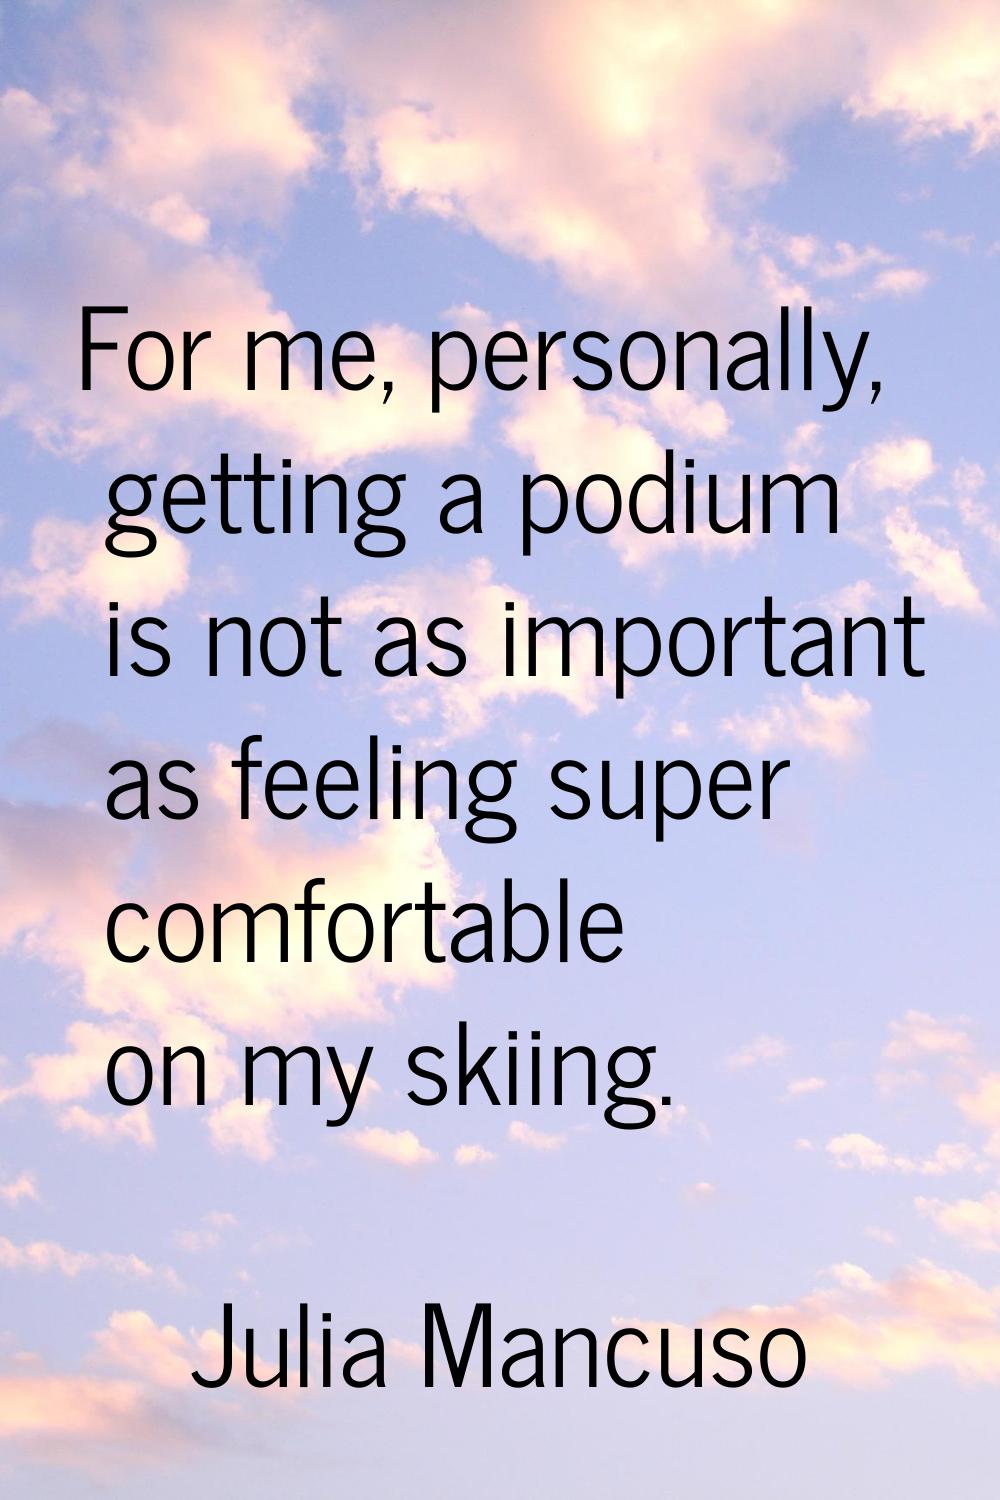 For me, personally, getting a podium is not as important as feeling super comfortable on my skiing.